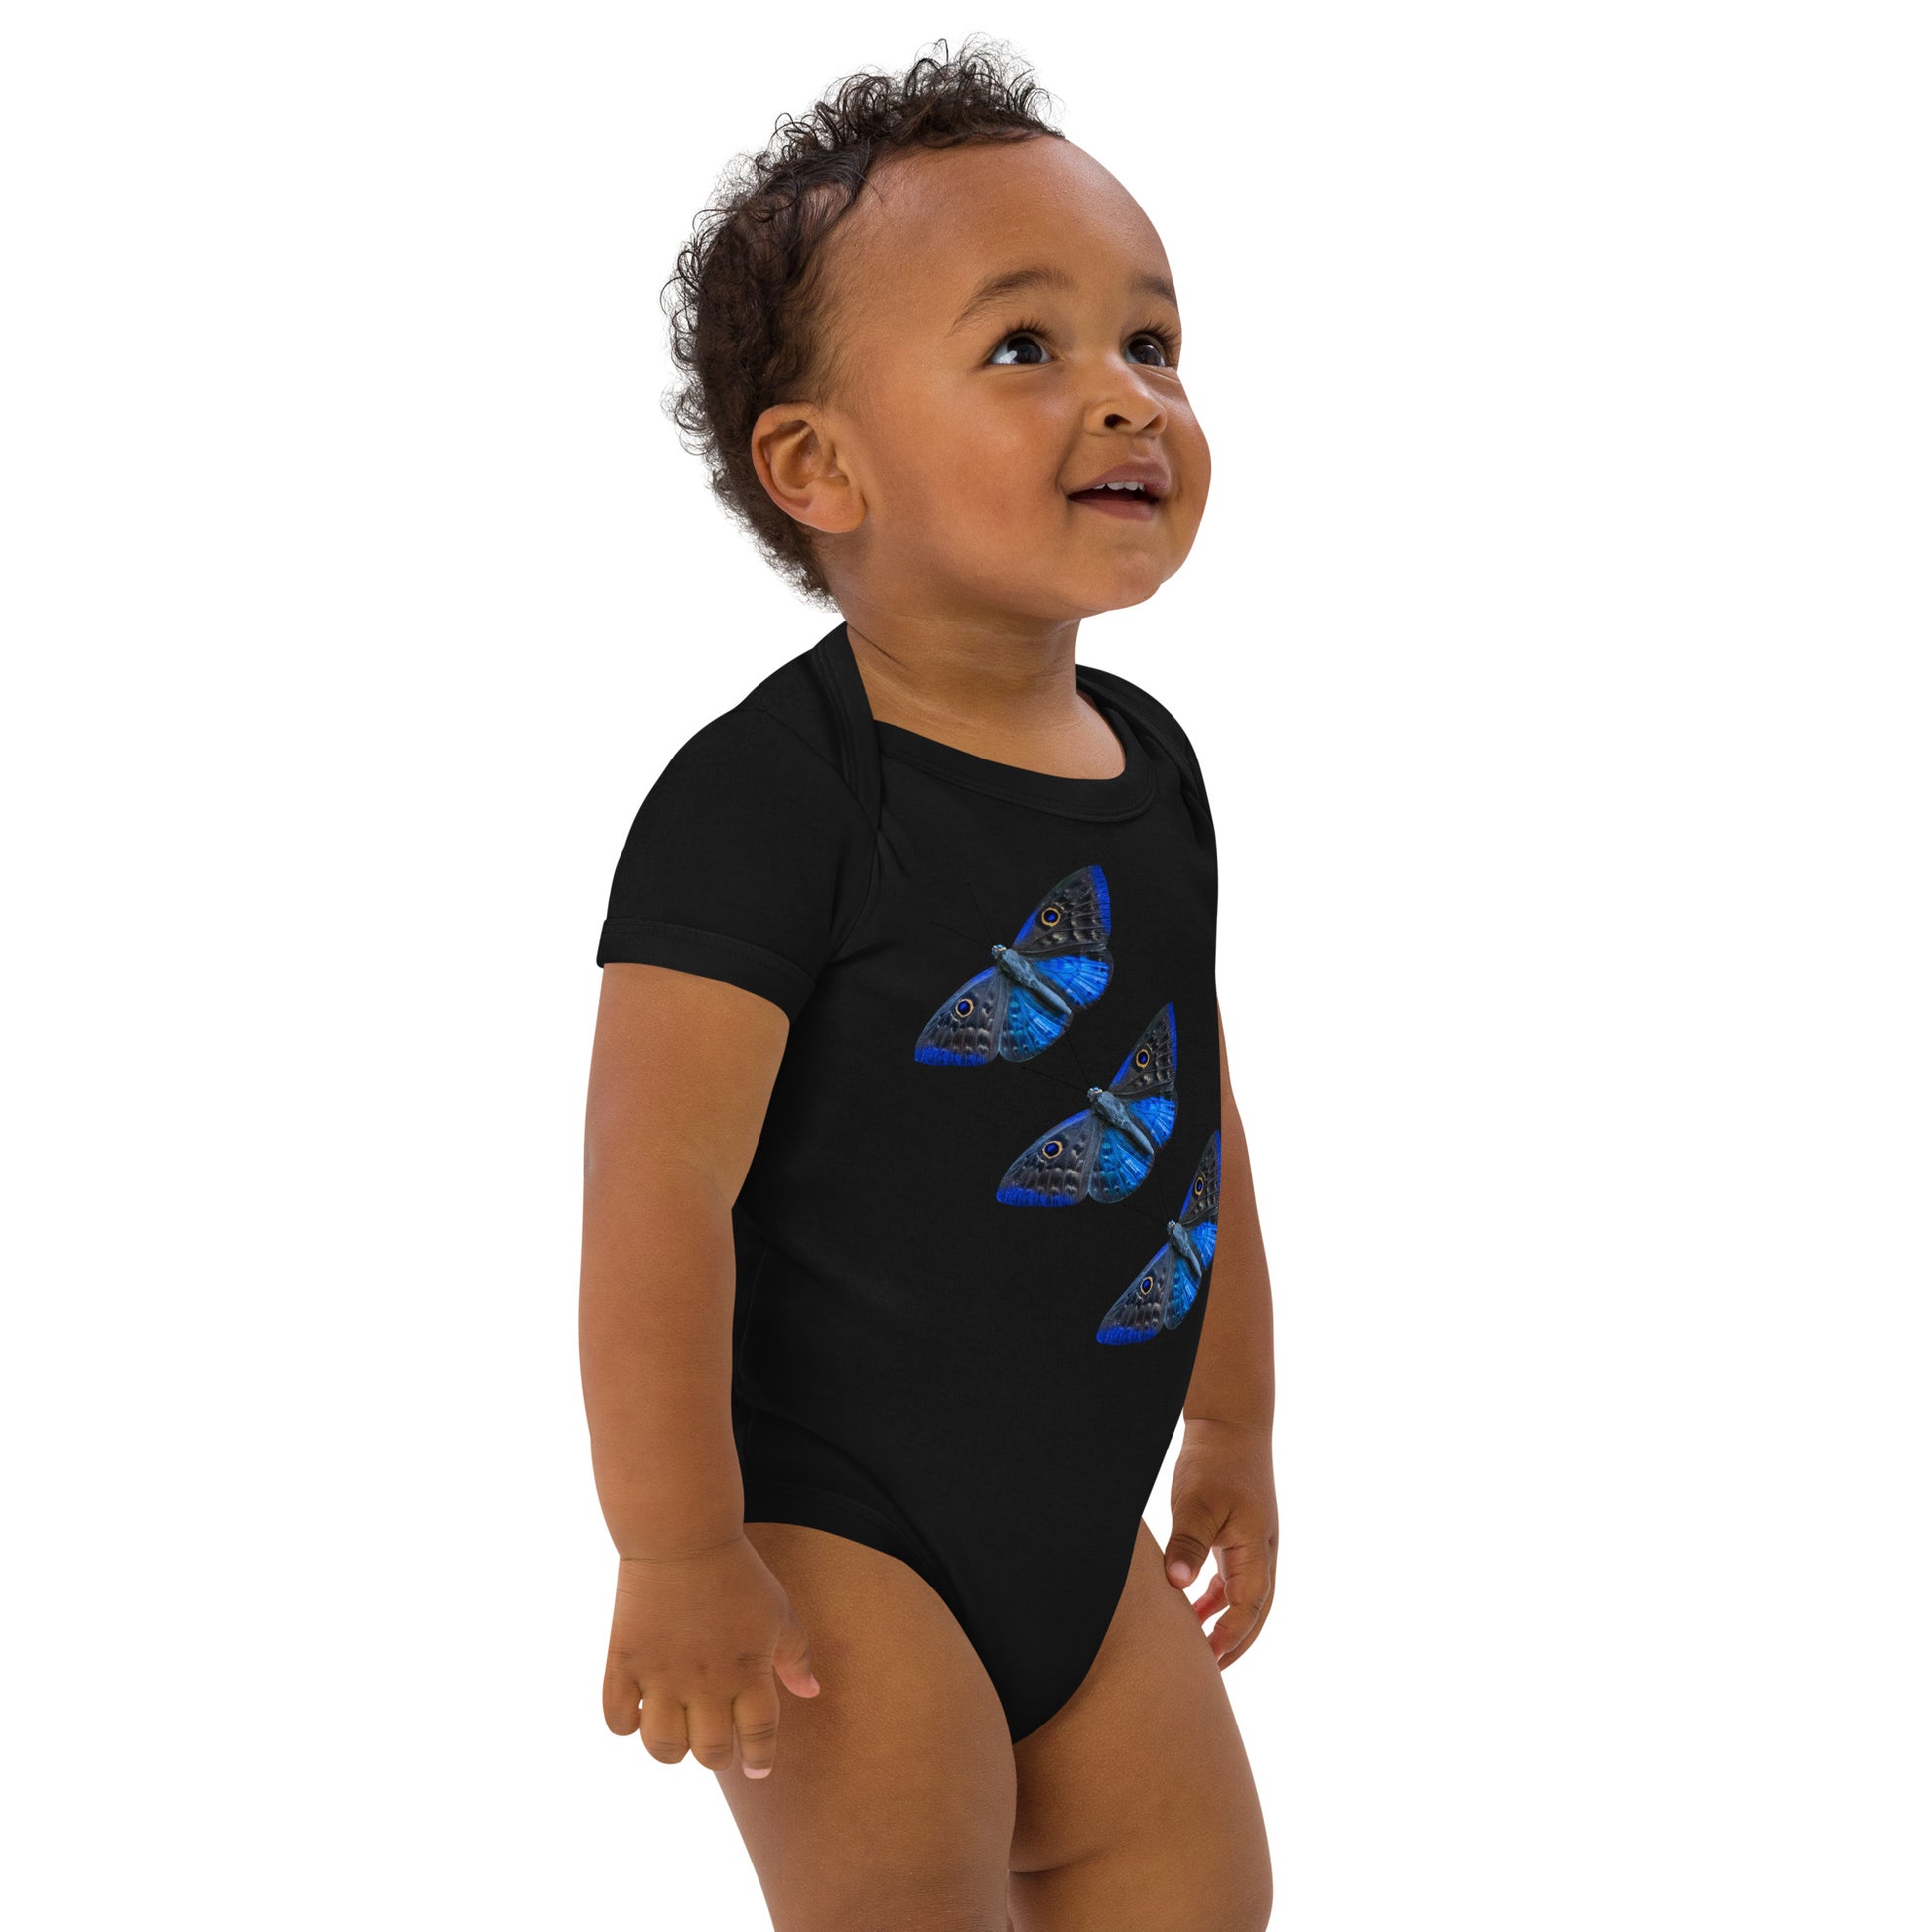 Baby with a black bodysuit with a picture of three butterfly's